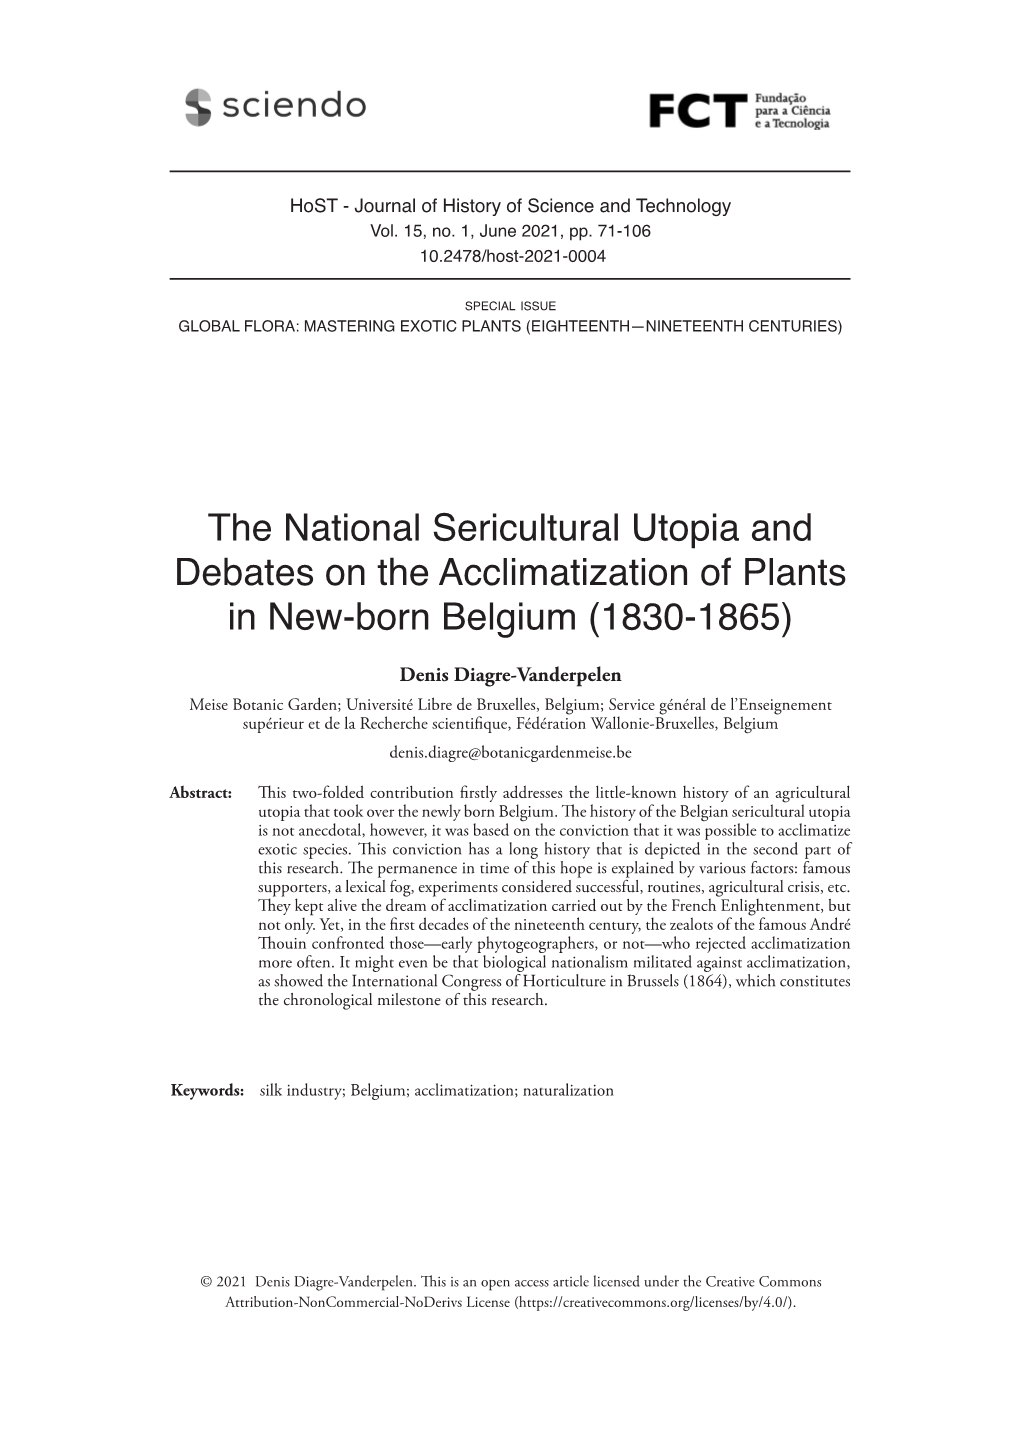 The National Sericultural Utopia and Debates on The